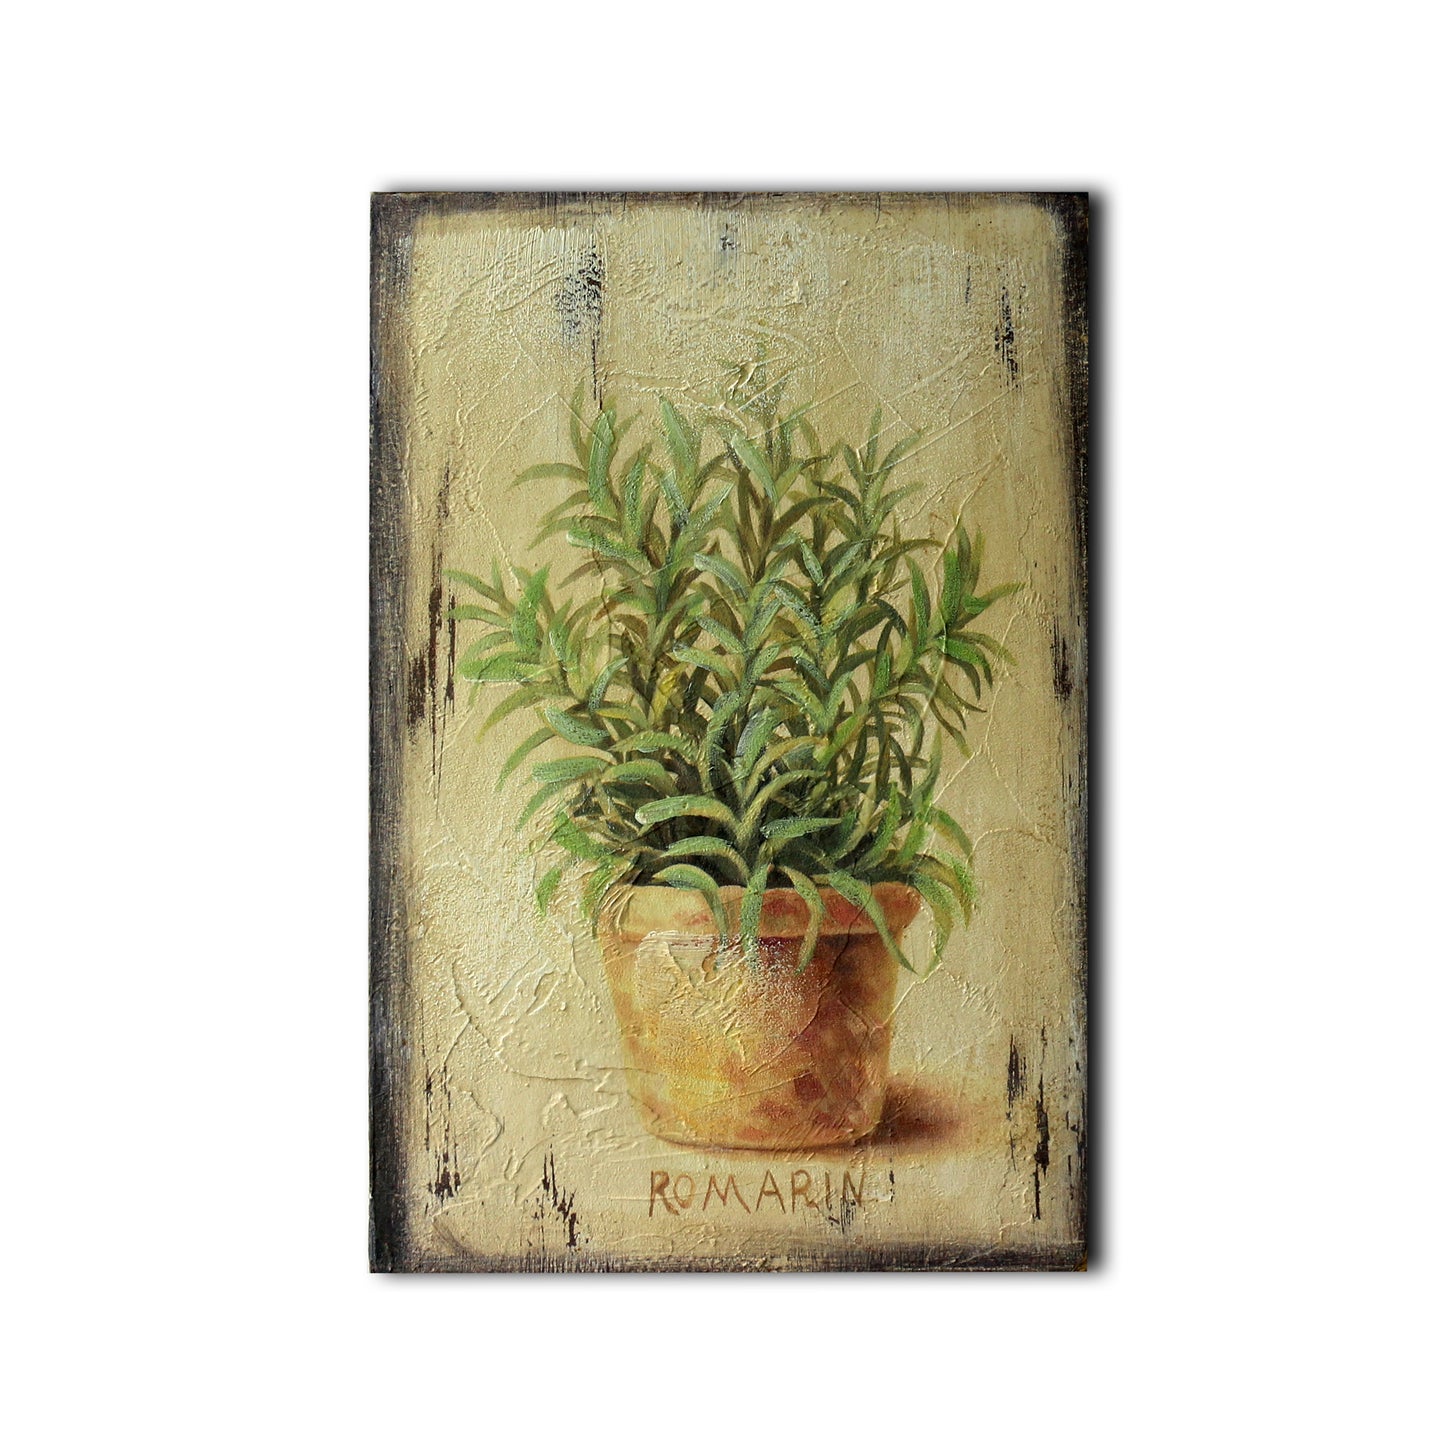 CVHOMEDECO. Rustic Vintage Hand Painted Wooden Frame Wall Hanging 3D Painting Decoration Art, Plant in Terracotta Design, 8 x 12 Inch